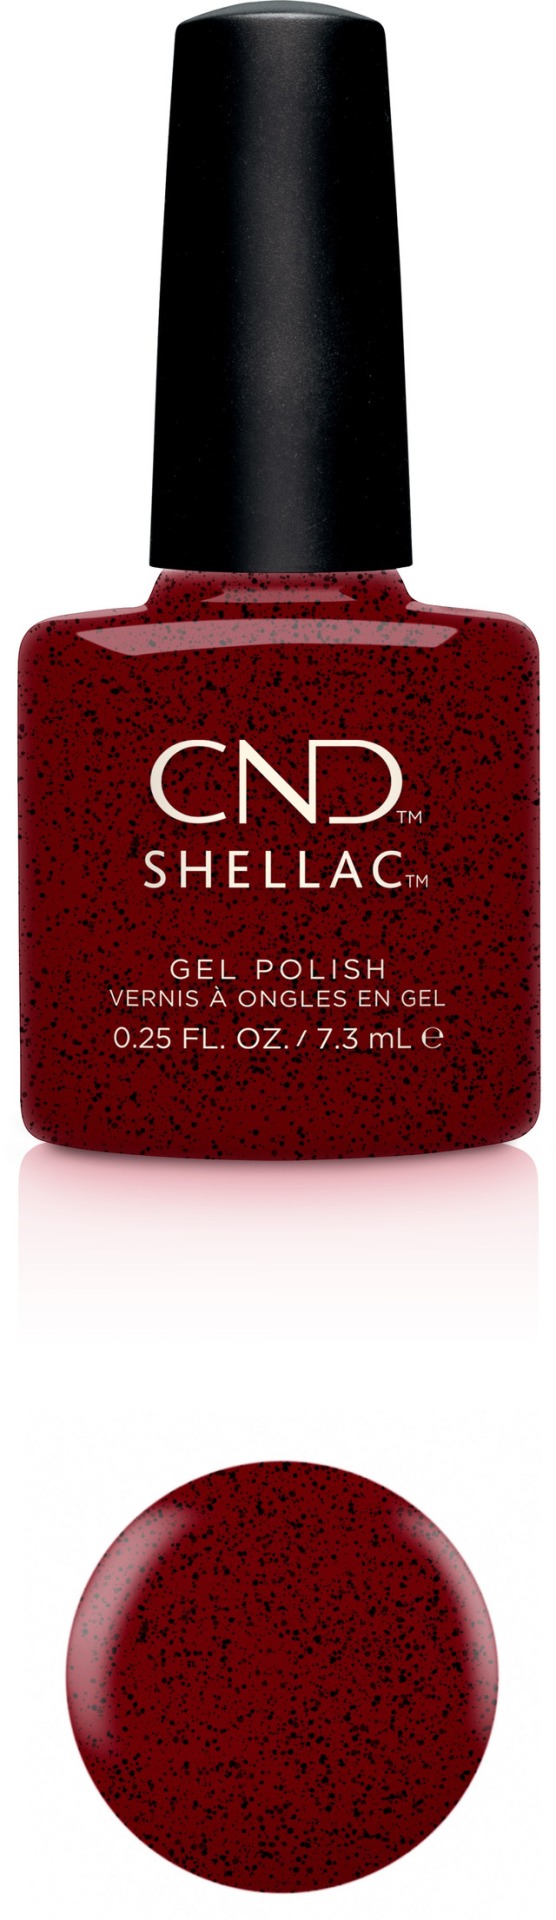 CND Shellac Needles & Red